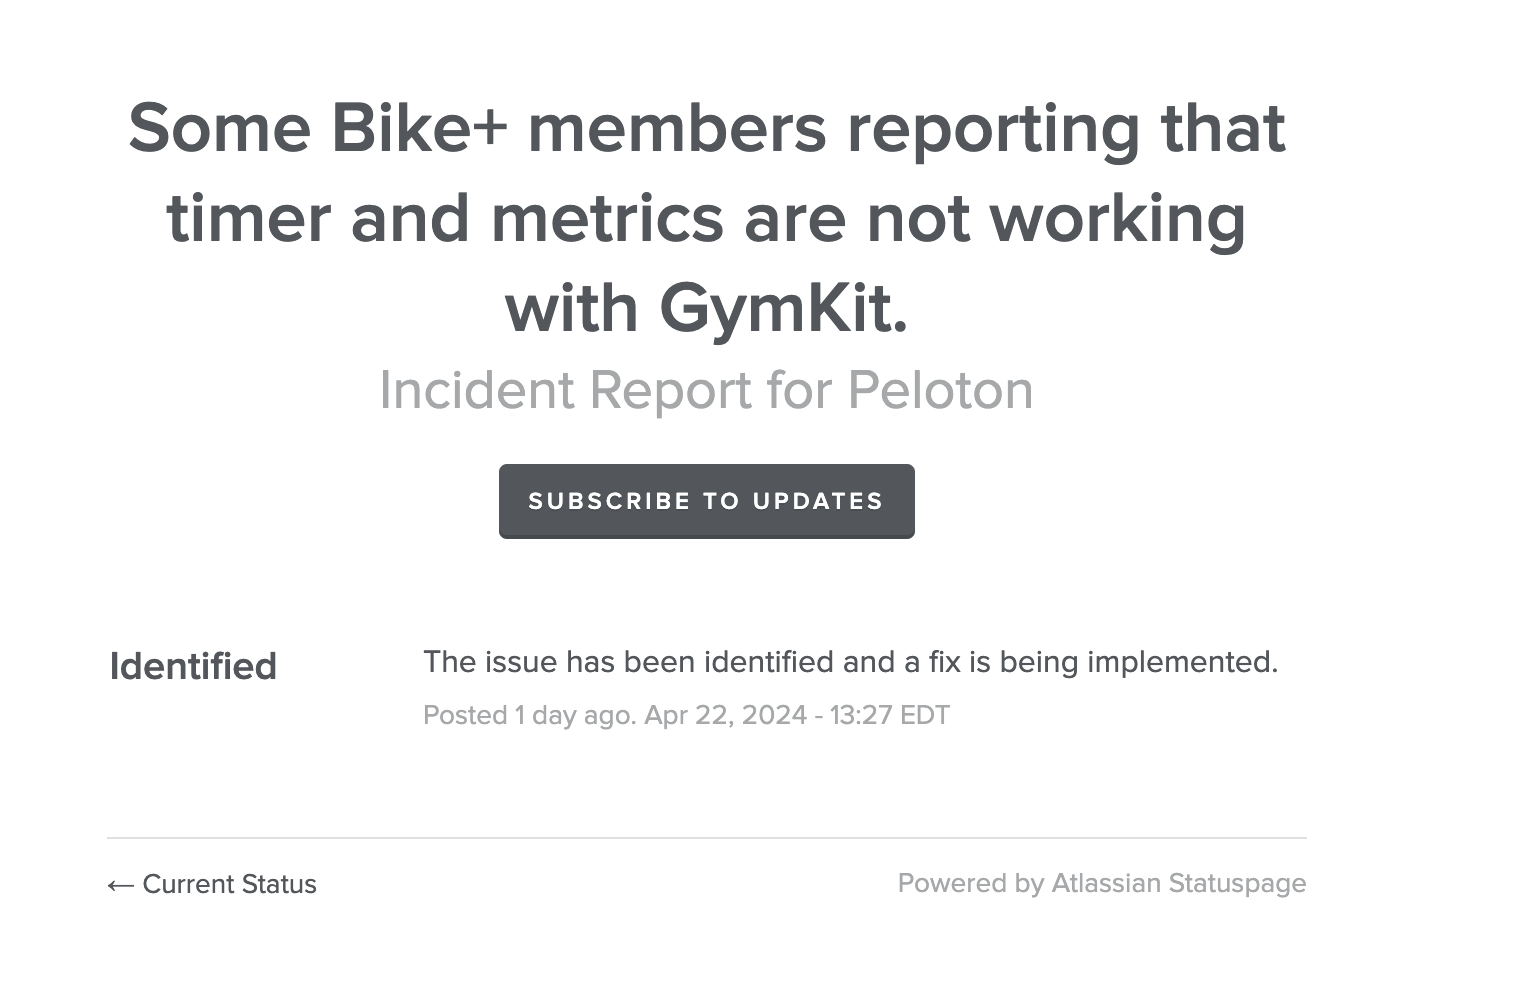 A new bug has been created related to the Apple Watch GymKit and Peloton Bike+